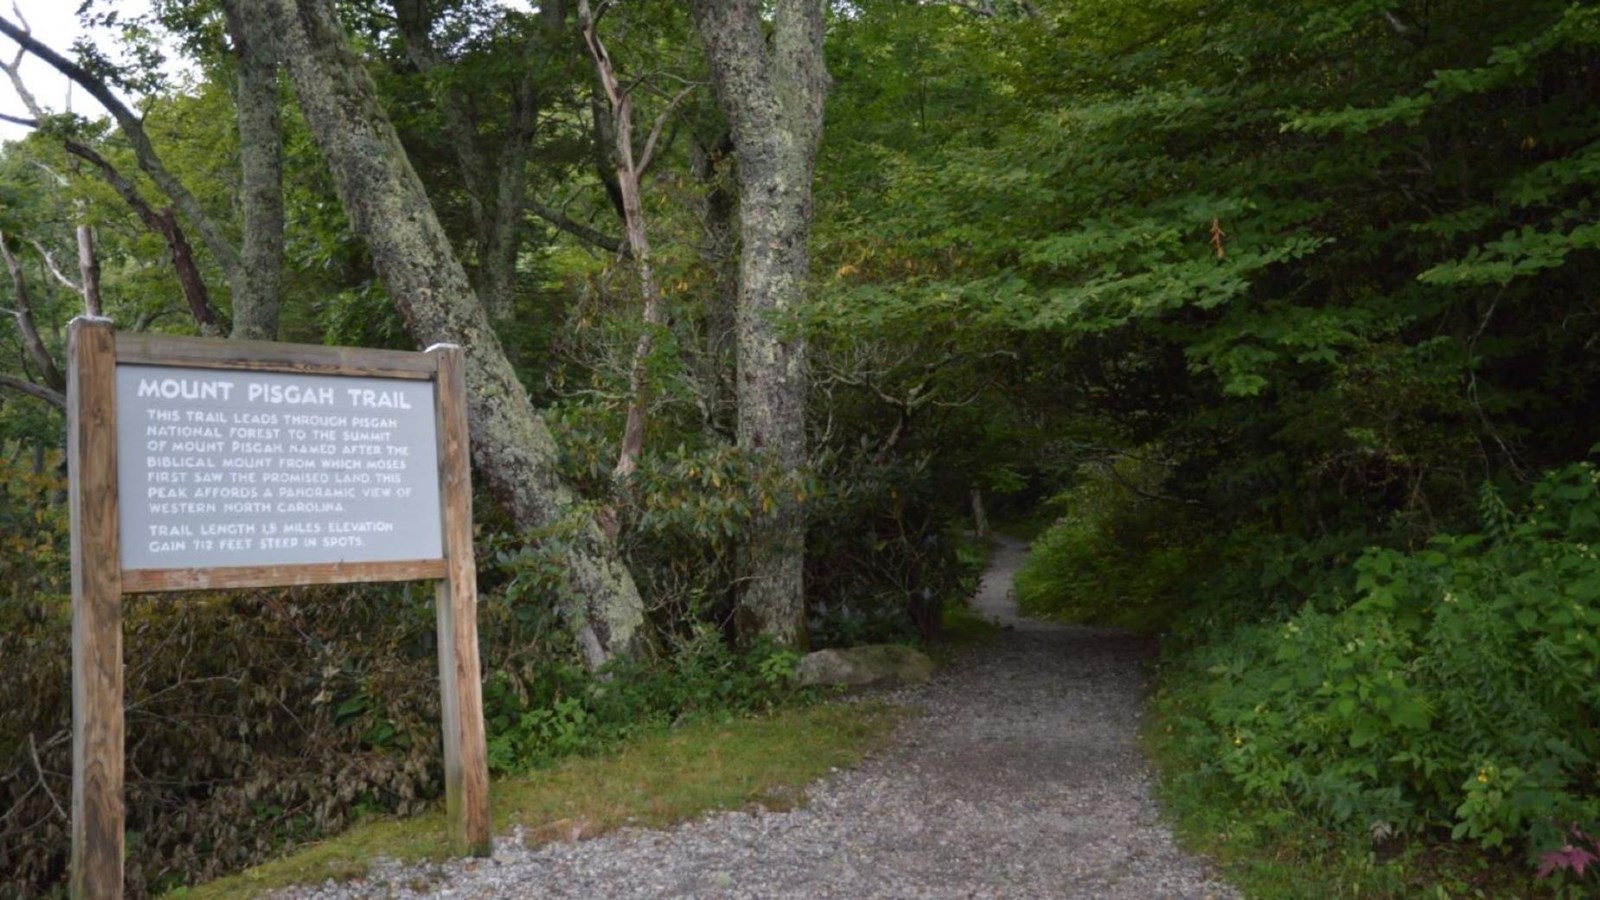 Large Mt. Pisgah information sign stands beside a gravel footpath leading into the woods.